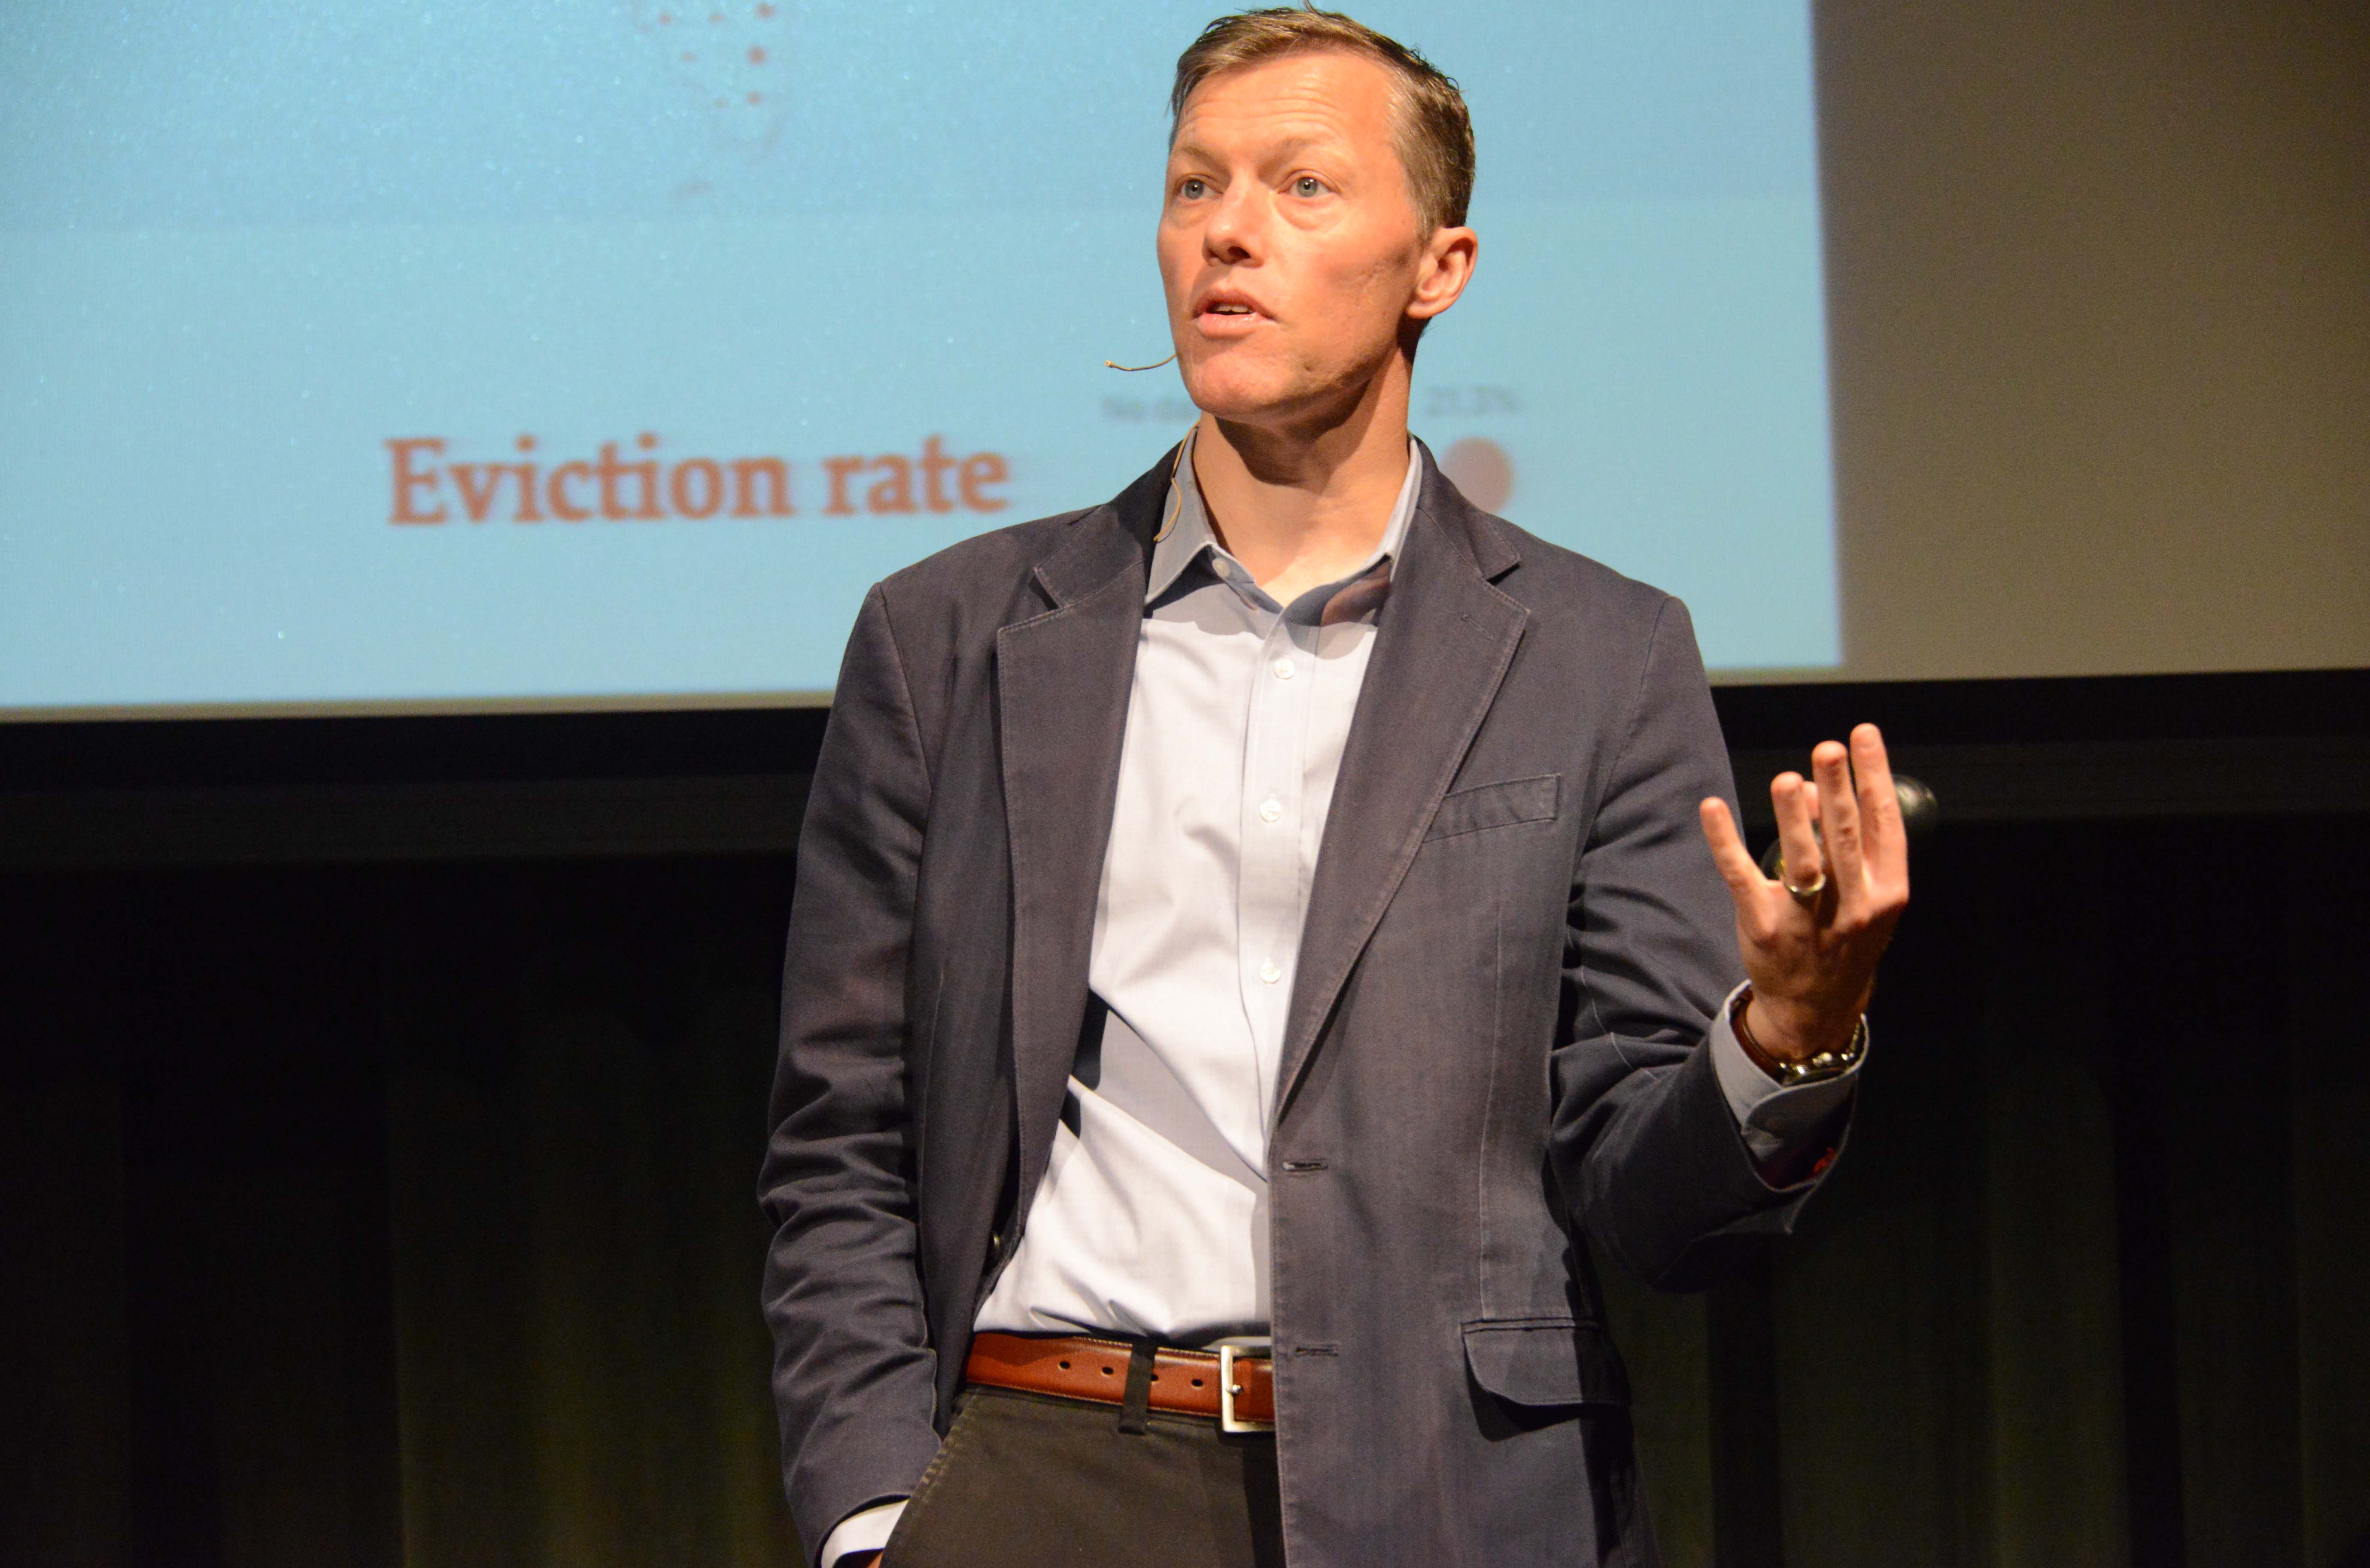 evicted by matthew desmond sparknotes